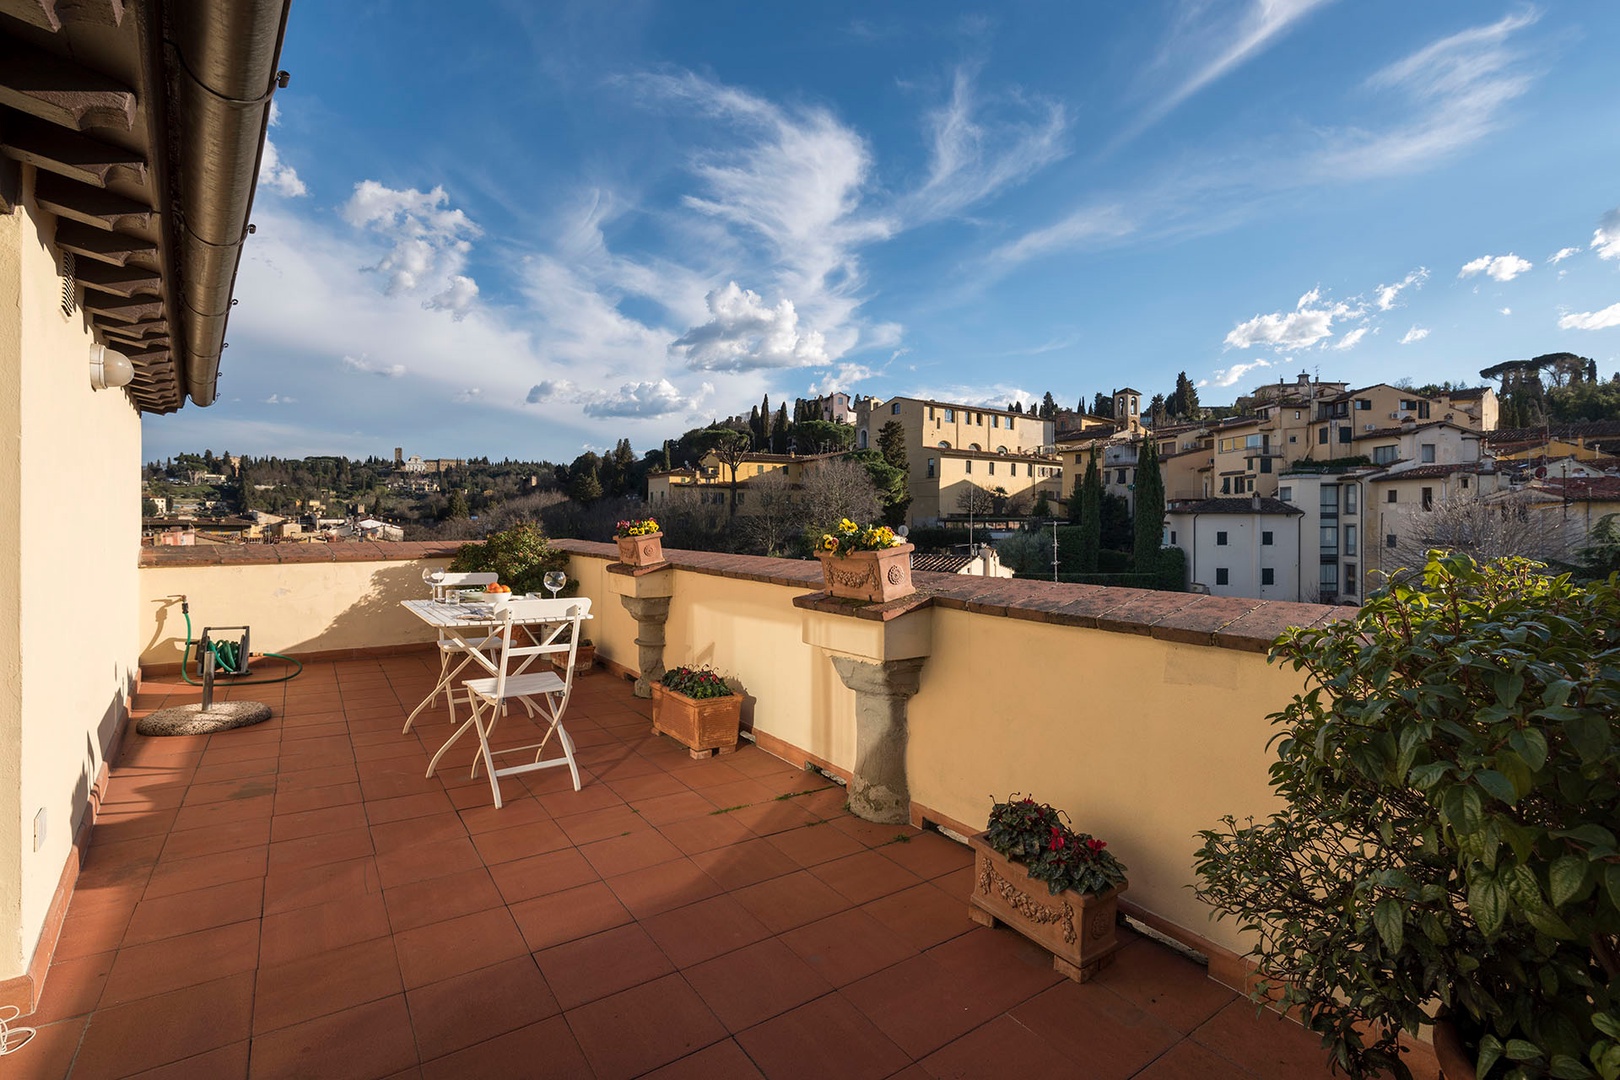 The delightful Torella apartment has a terrace that faces Piazzale Michelangelo and San Miniato.